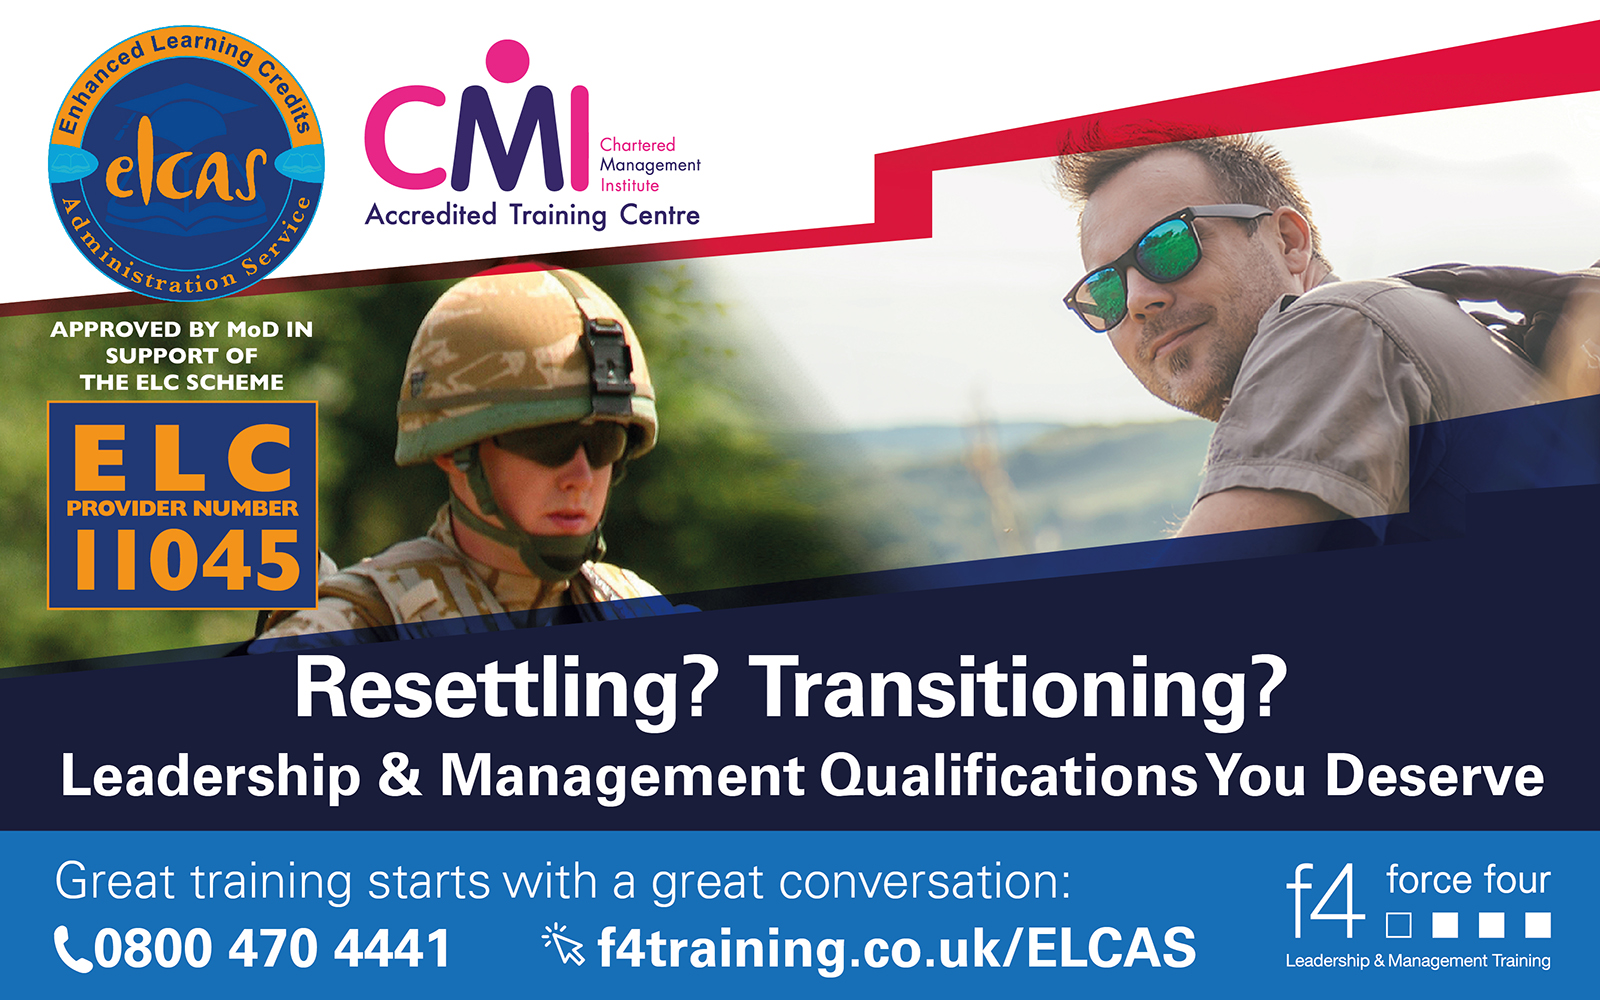 New CMI Training Partner To Deliver ELCAS Funded Leadership & Management Courses